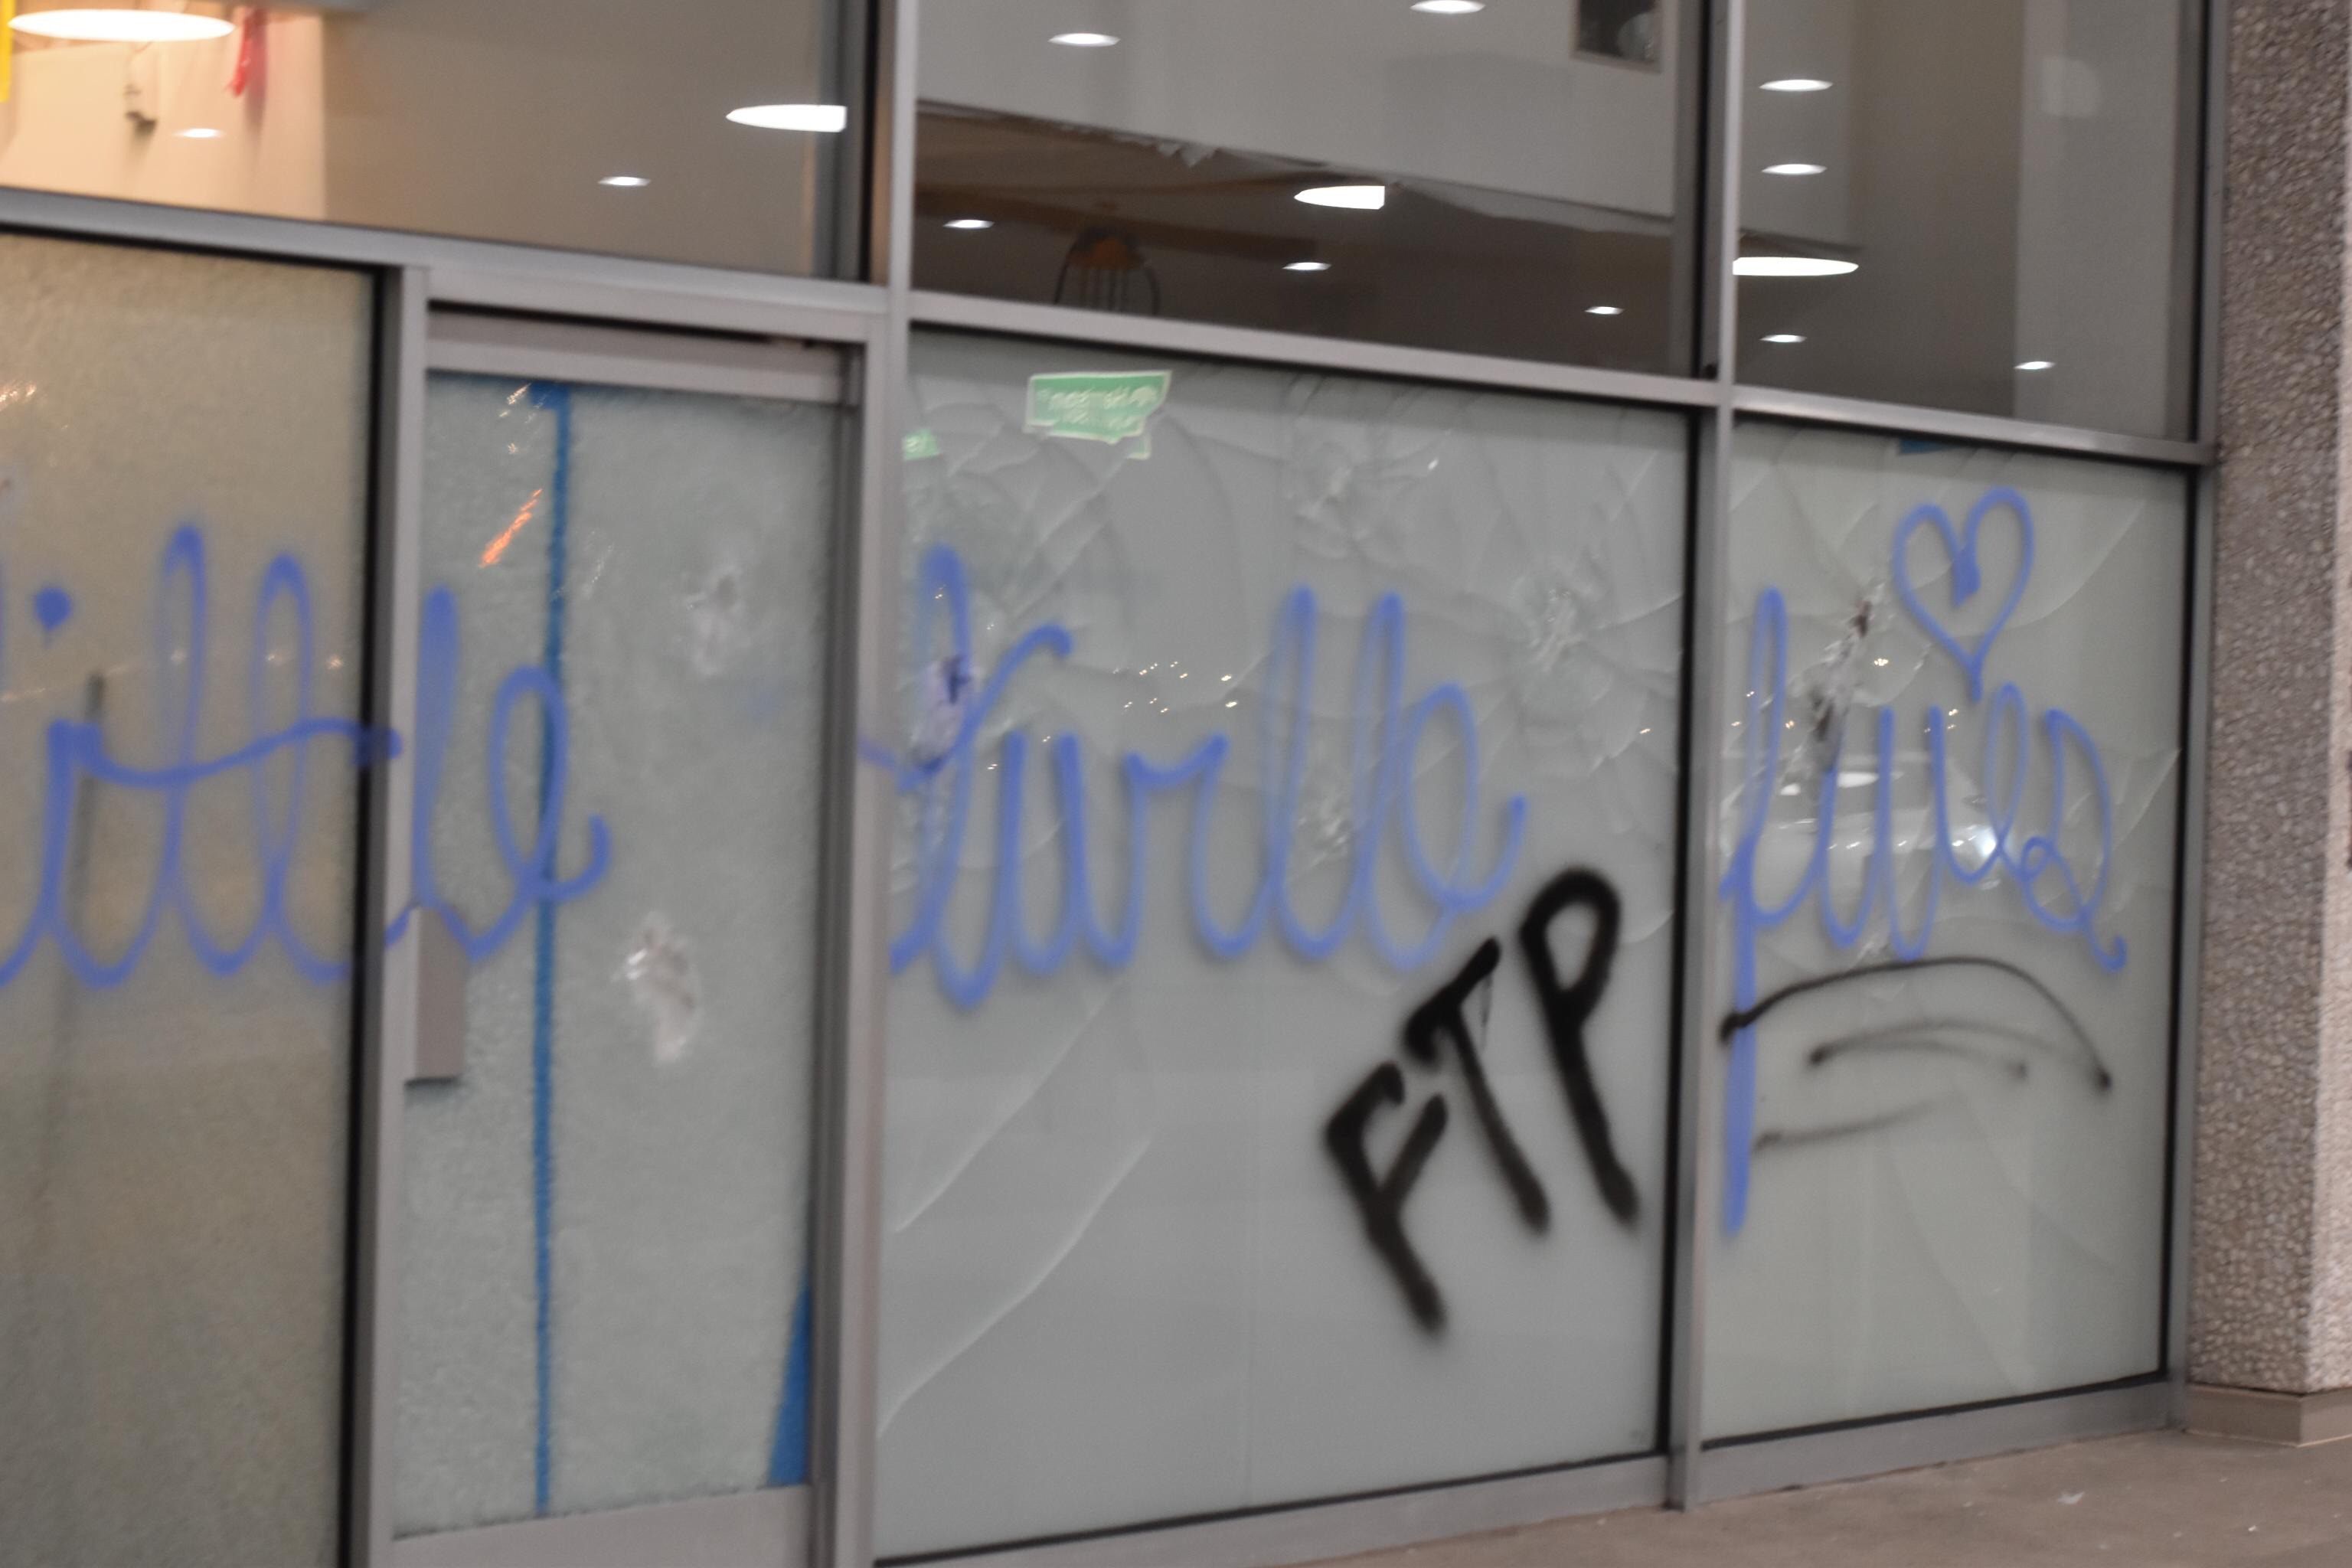 Onto a glass door and several windows, "Little turtle lives" is tagged in light blue spray paint. "FTP" is tagged in black spray paint directly below it.